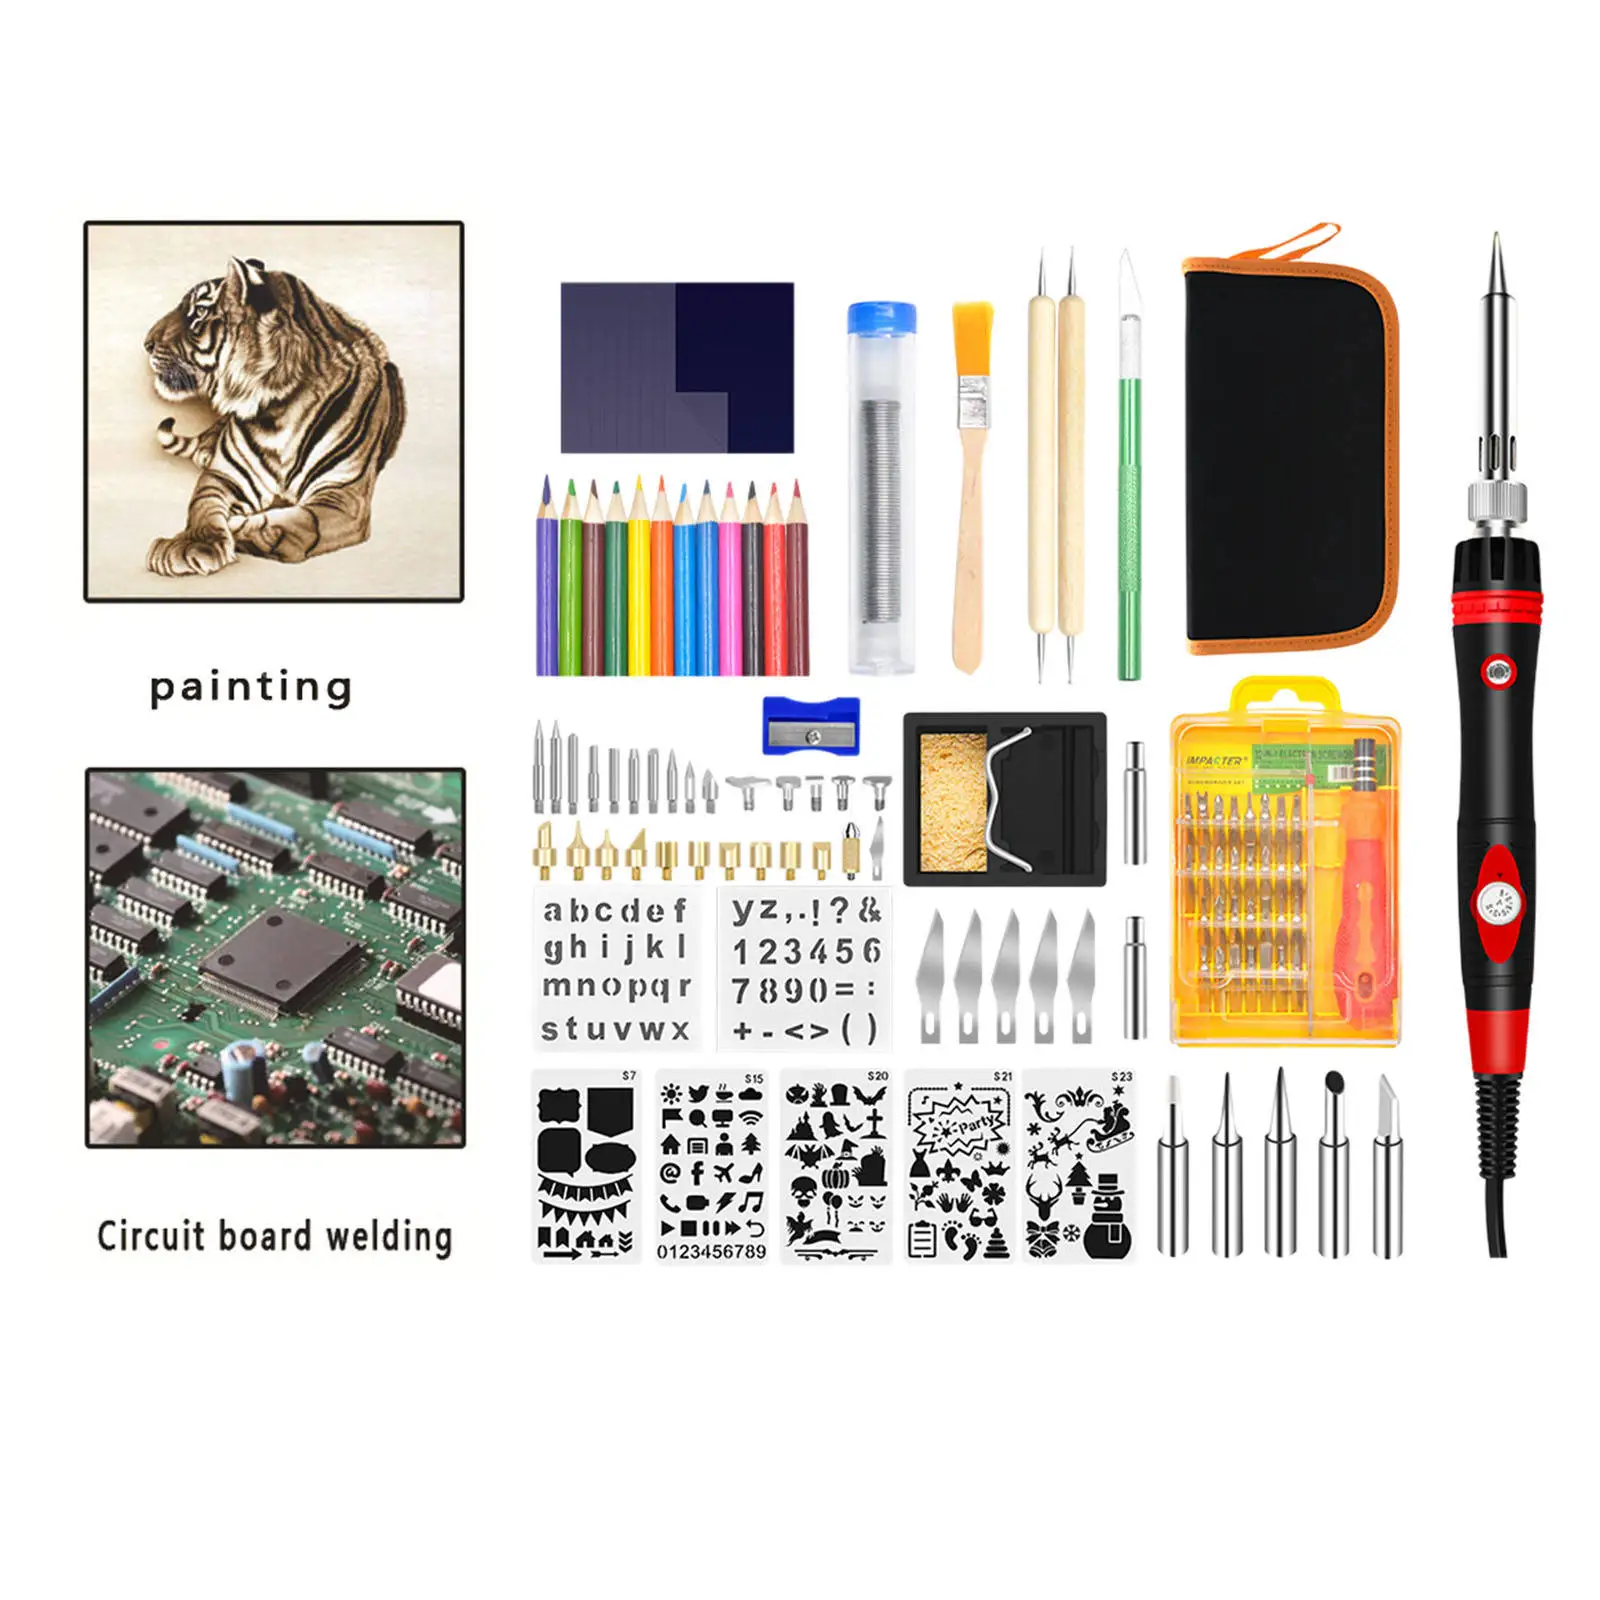 Wood Burning Kit Accessories W/Carrying Case Tool Pyrography Pen Brush DIY for Embossing Carving Soldering Woodburning